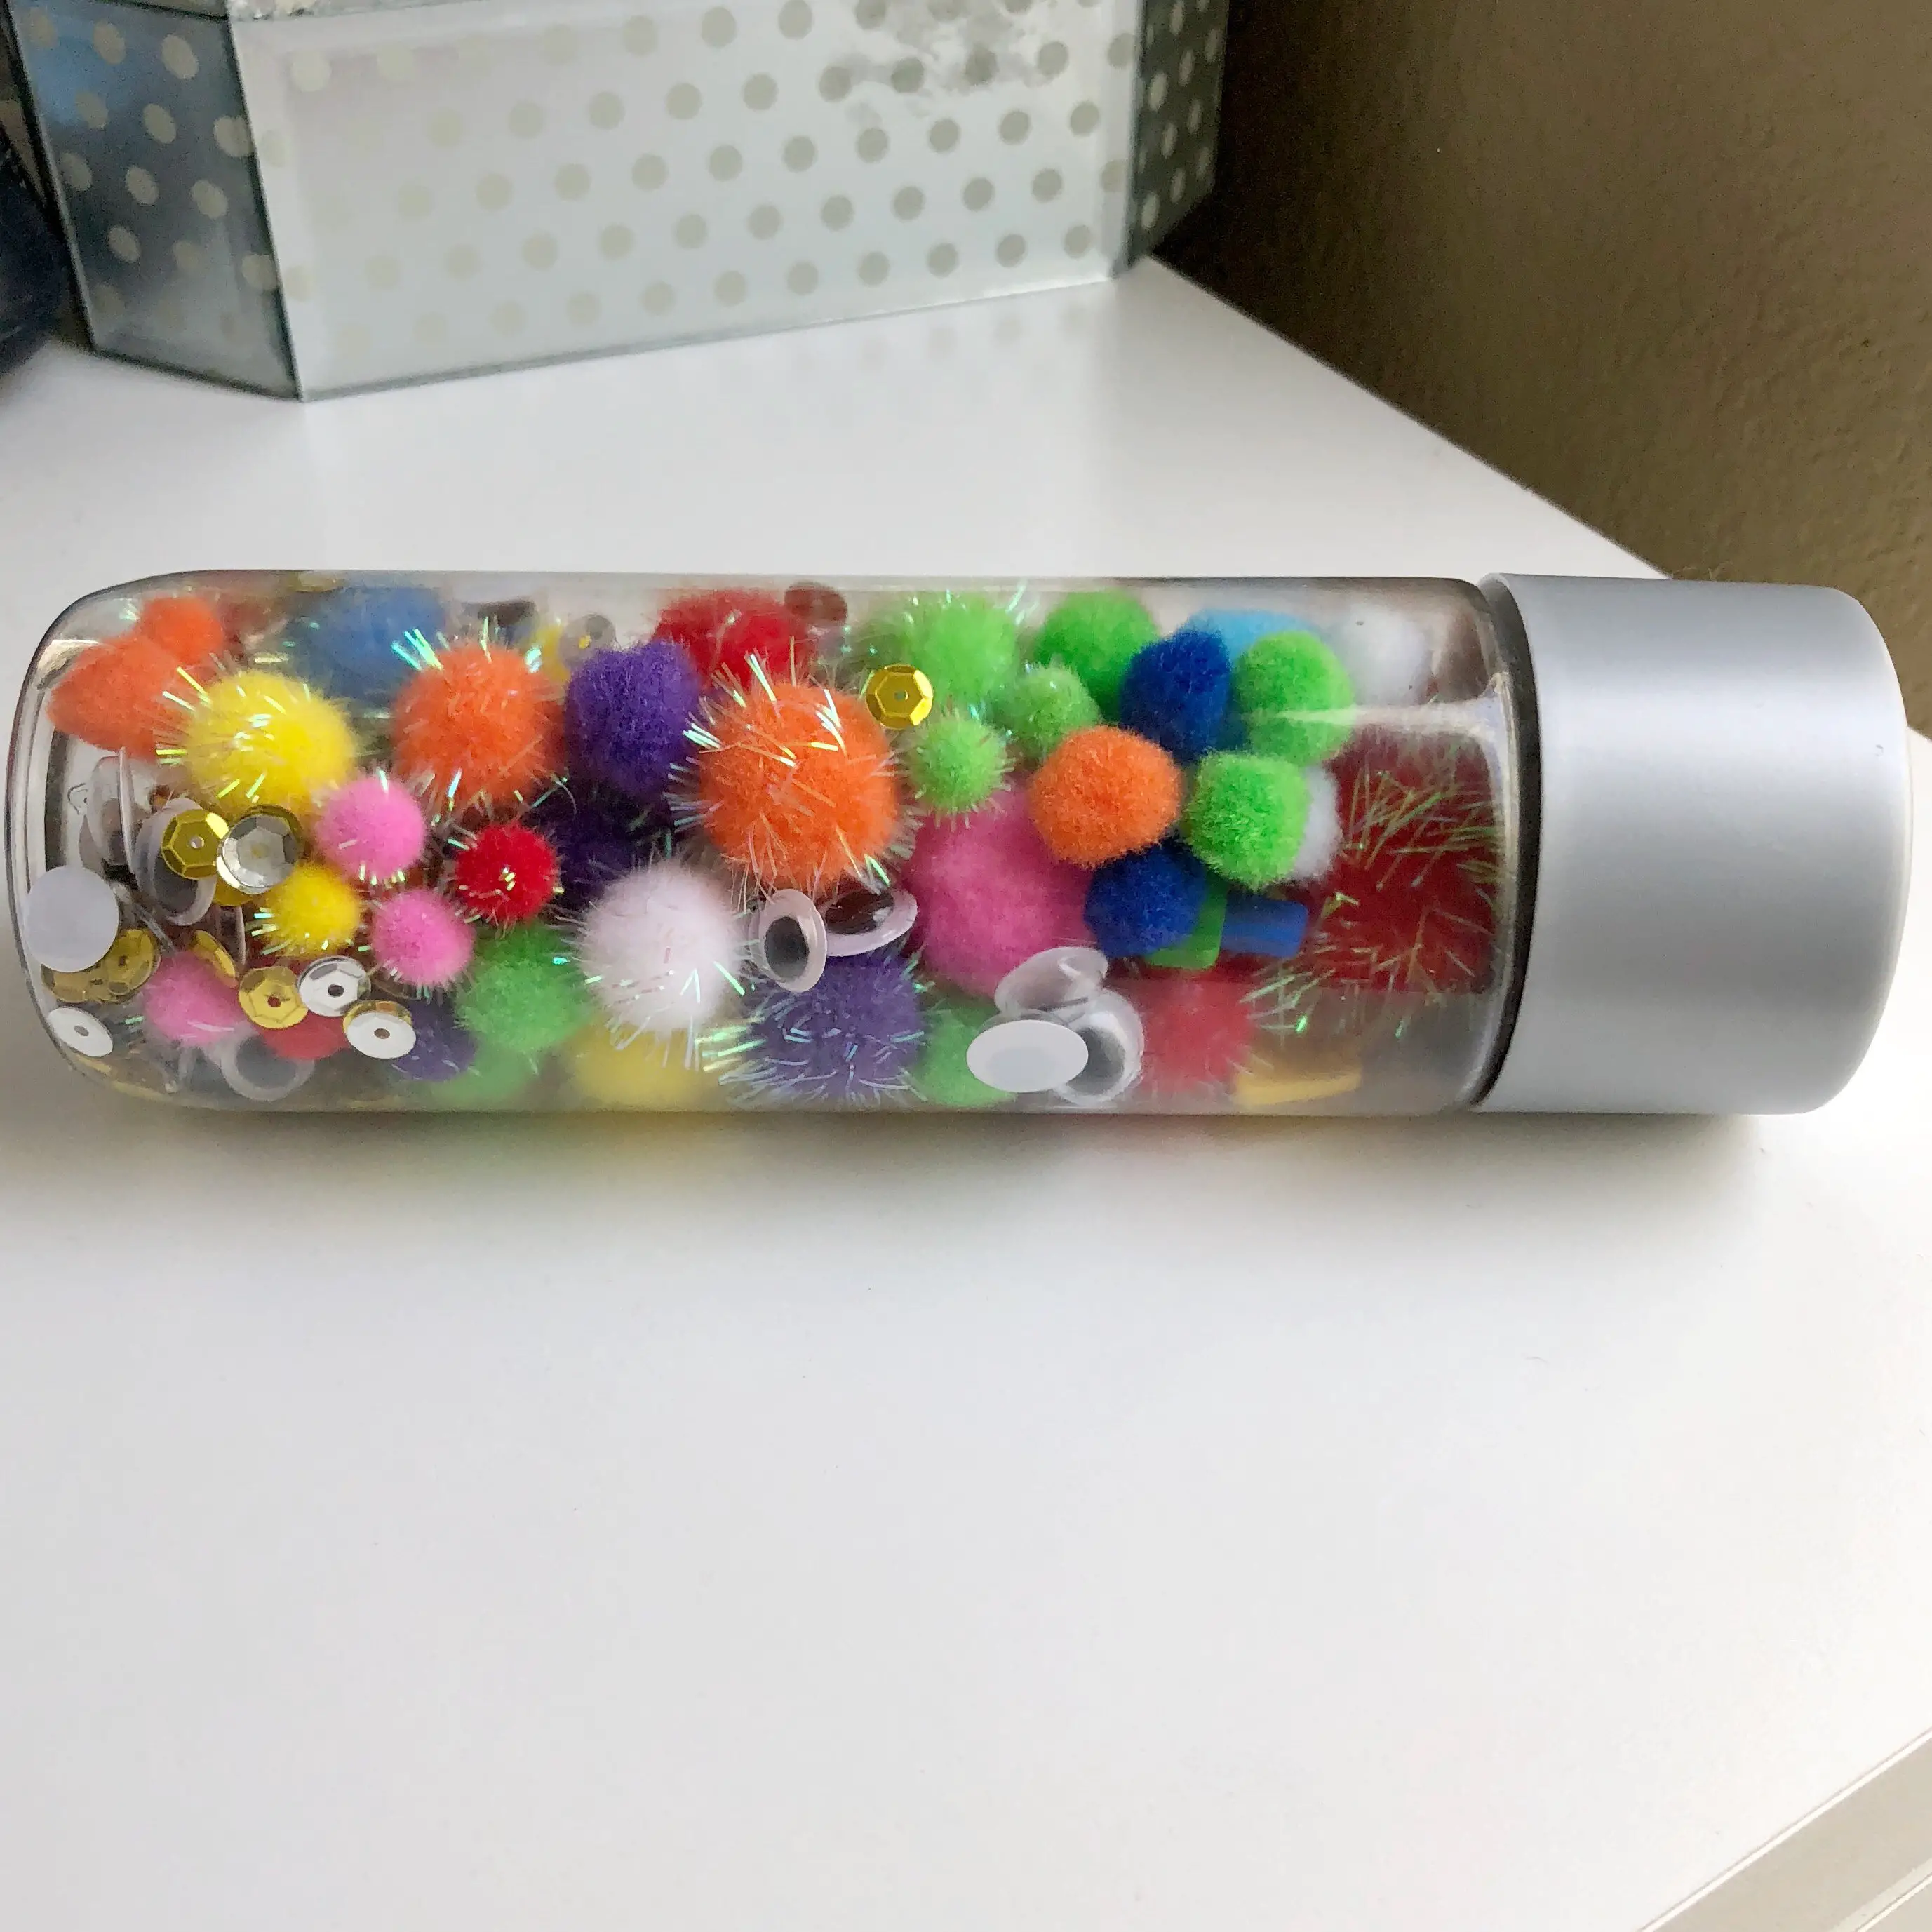 Find out how to make this simple sensory bottle in under five minutes! This bottle contains no liquid inside, so it is super lightweight for your toddler!